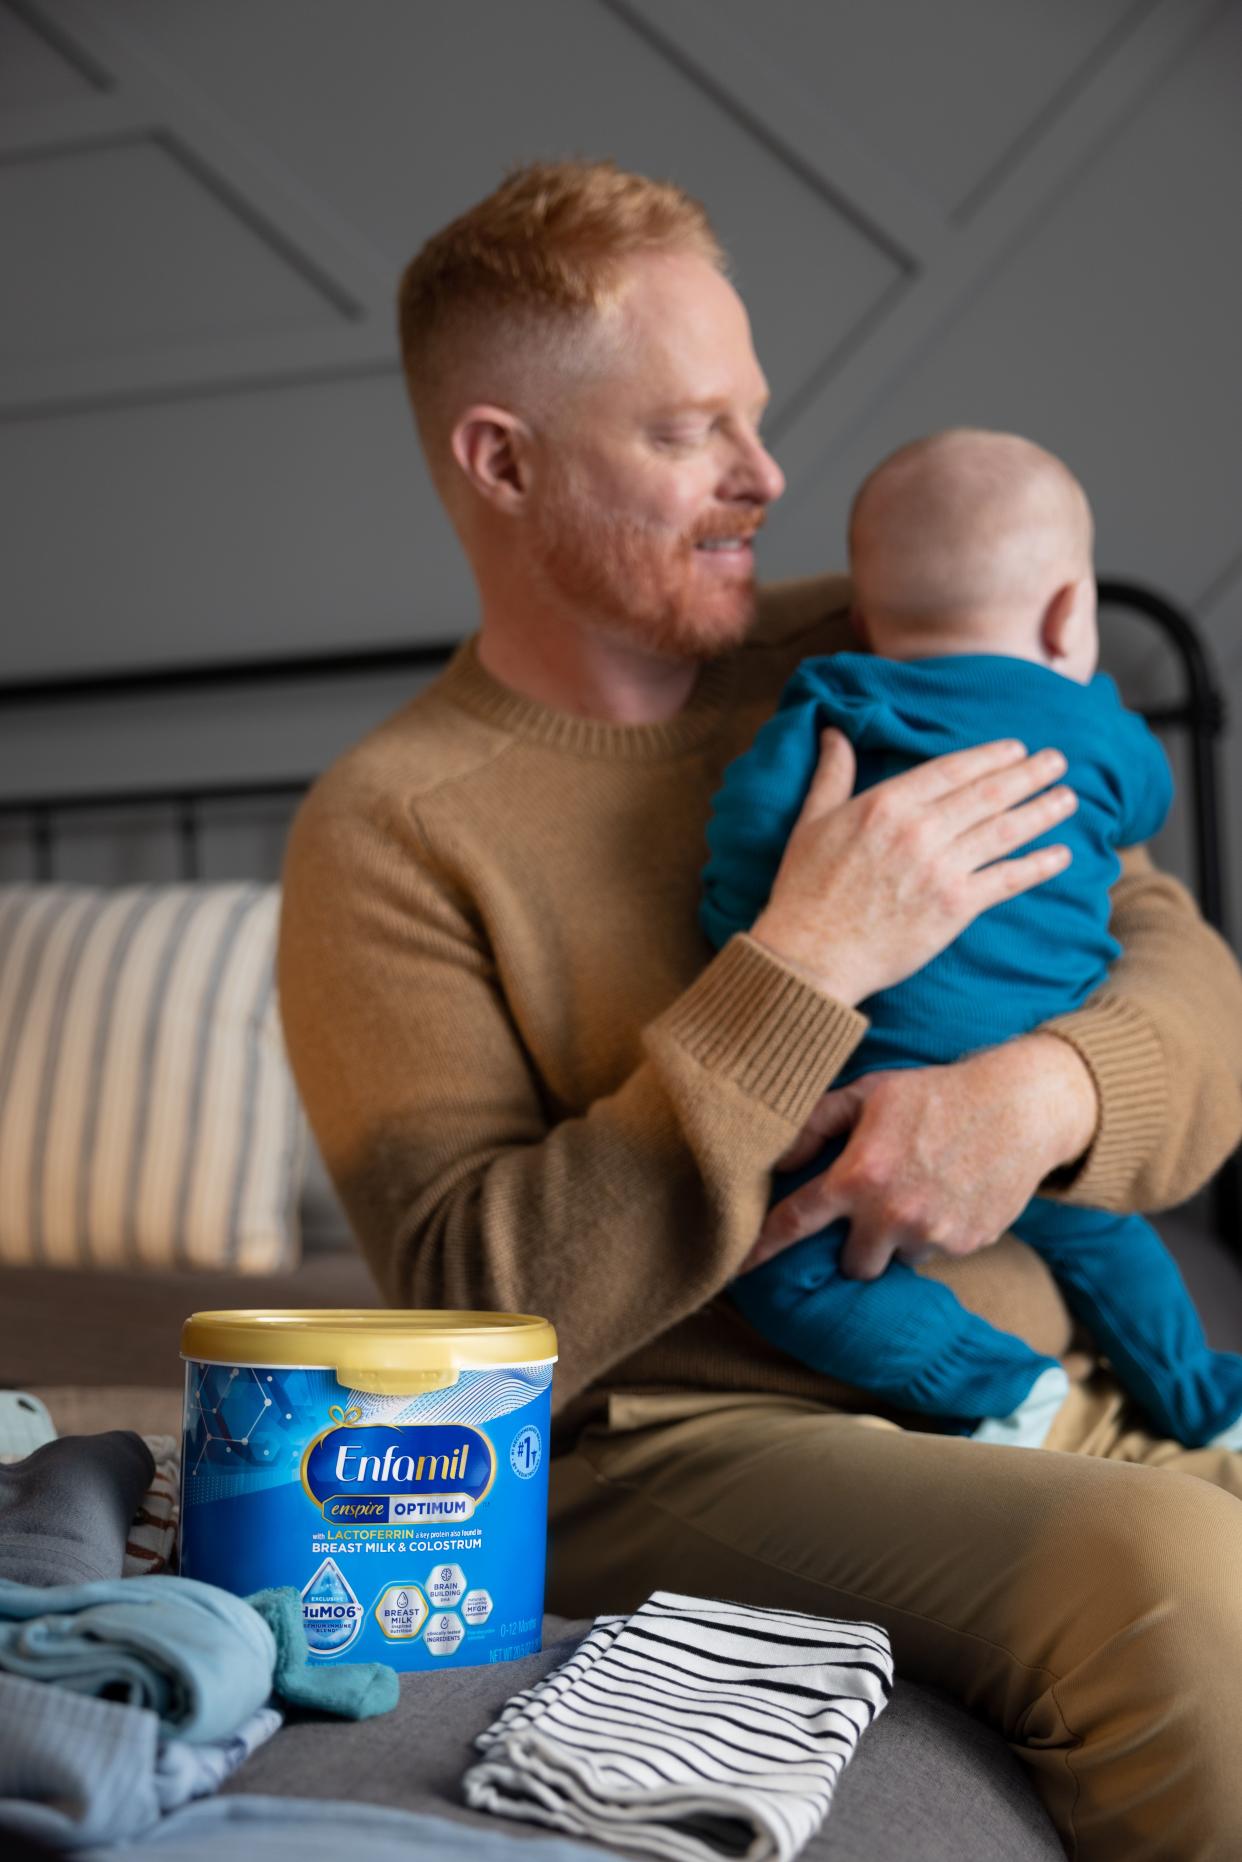 The actor and husband Justin Mikita used Enfamil as an alternative to breast milk for their two boys. (Photo: Courtesy of Enfamil)